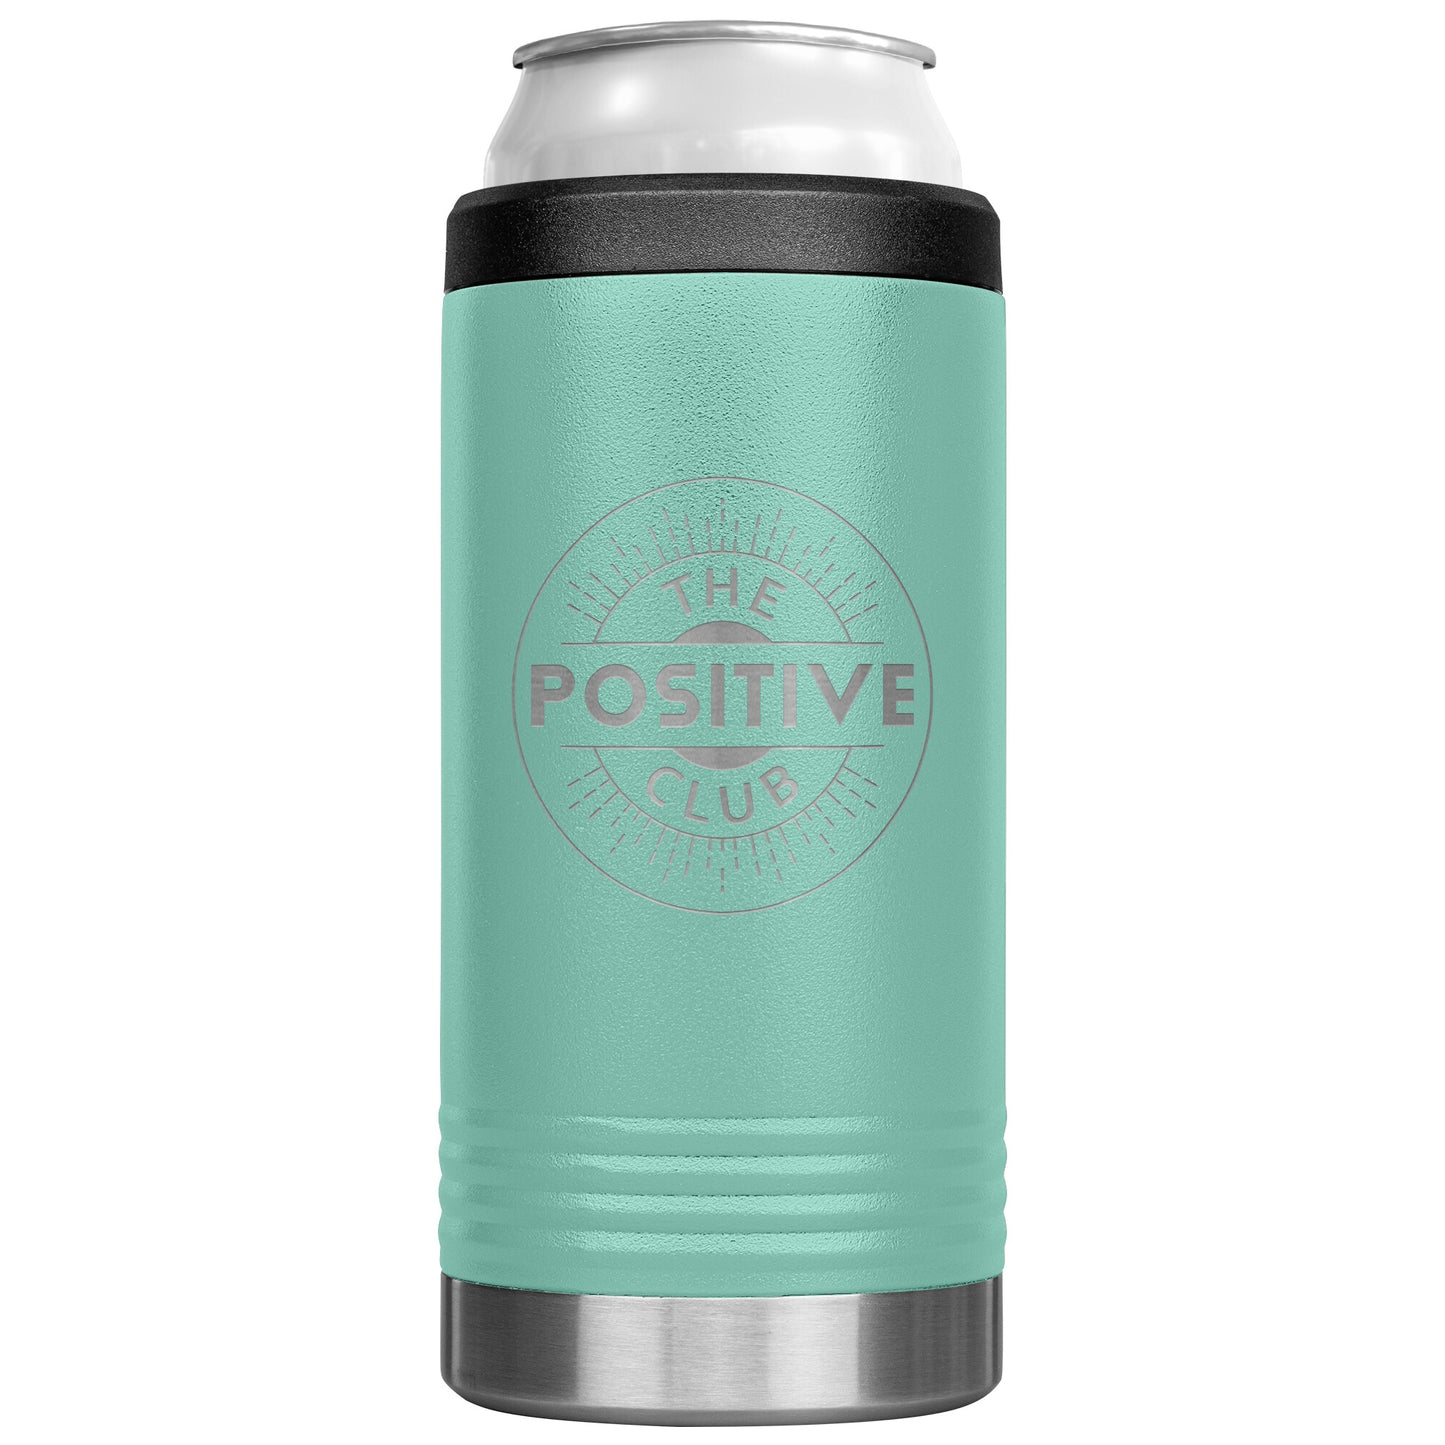 12oz Cozie Insulated Tumbler The Positive Club ( Free Shipping )